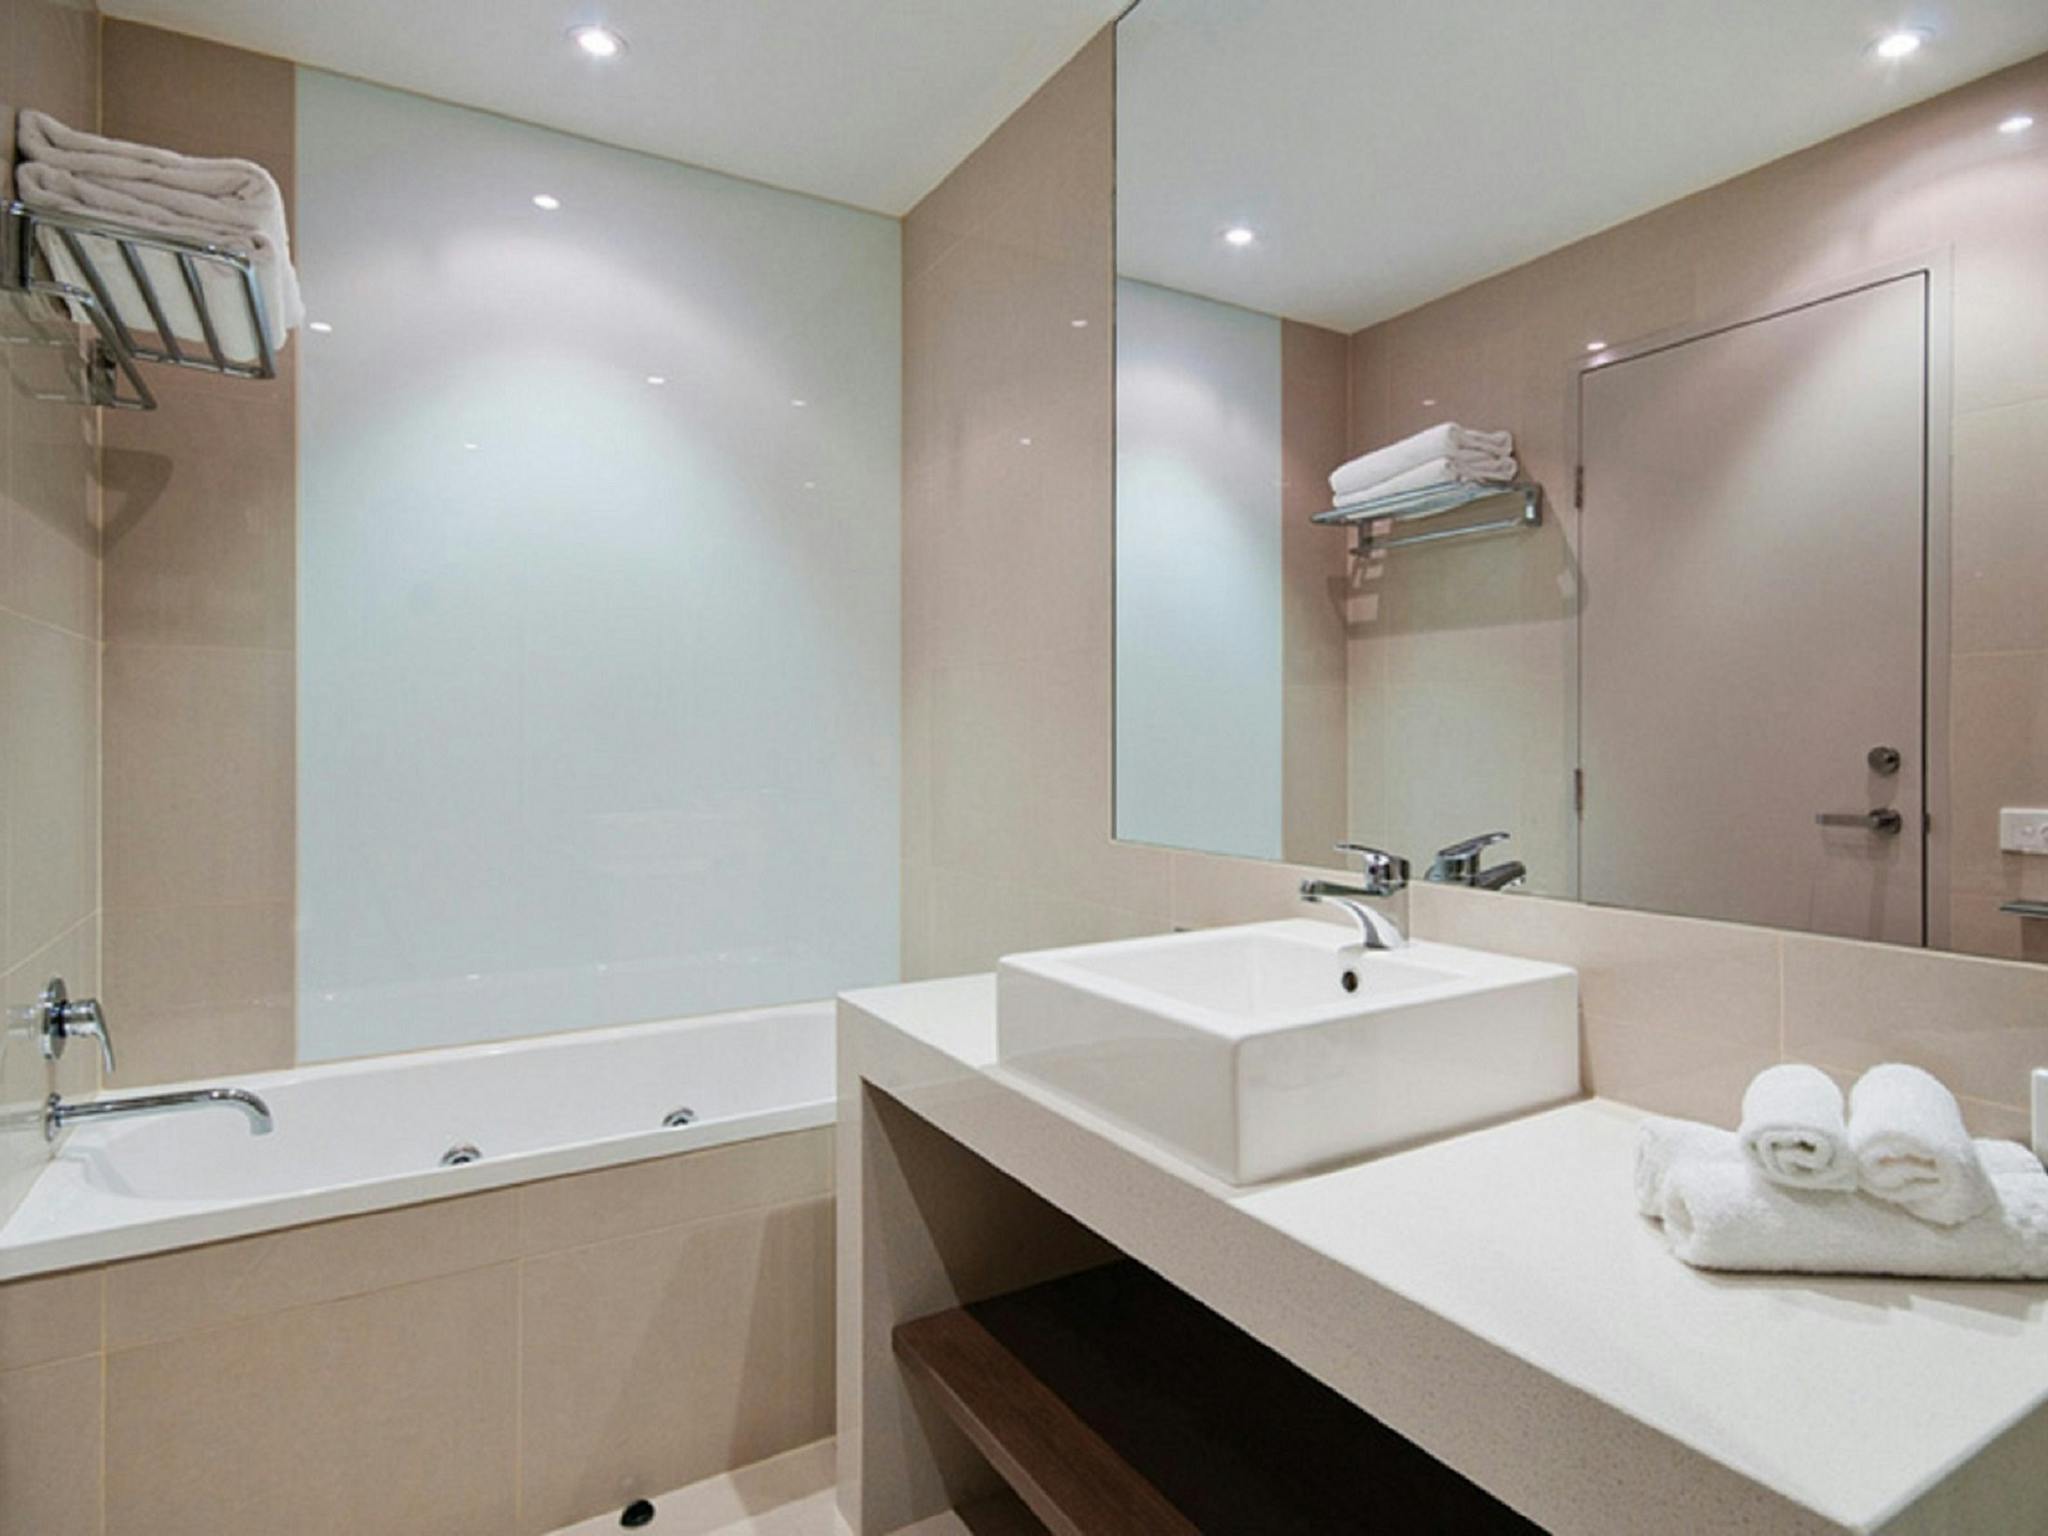 The Gateway's Apartments include bathroom with spa bath and separate toilet